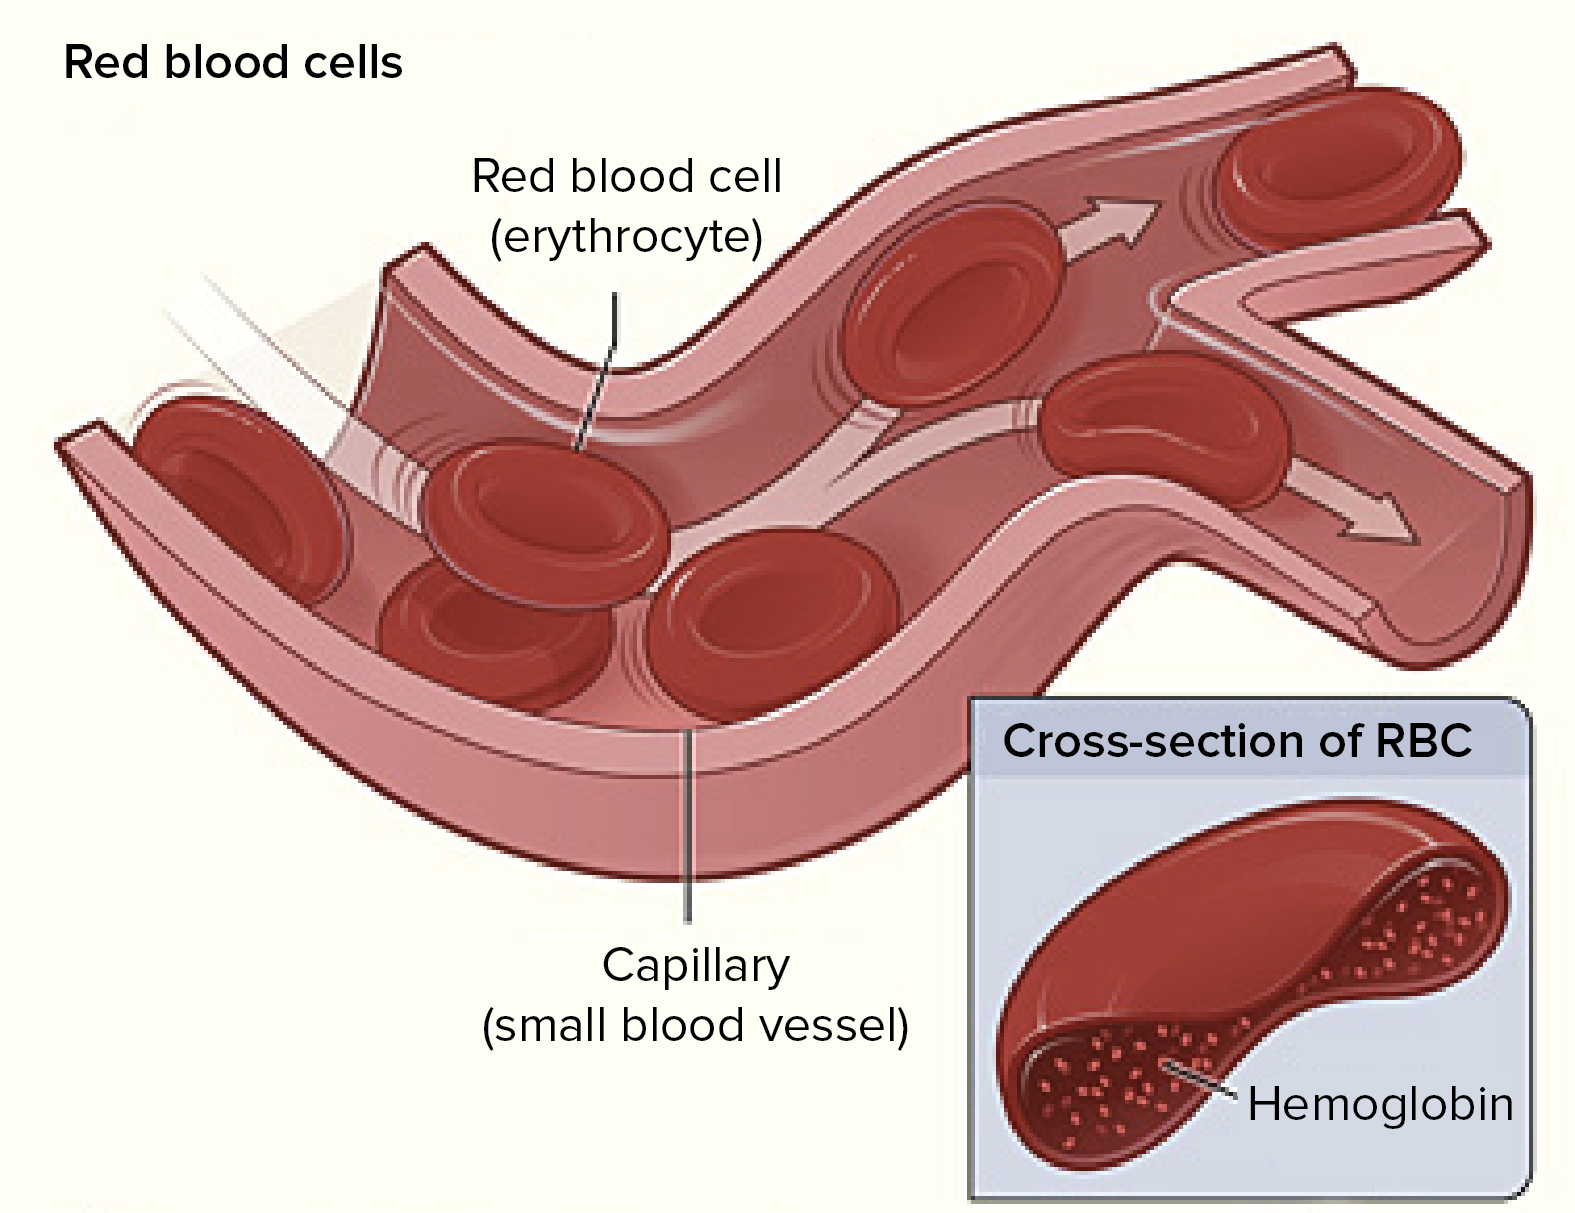 blood tissue labeled